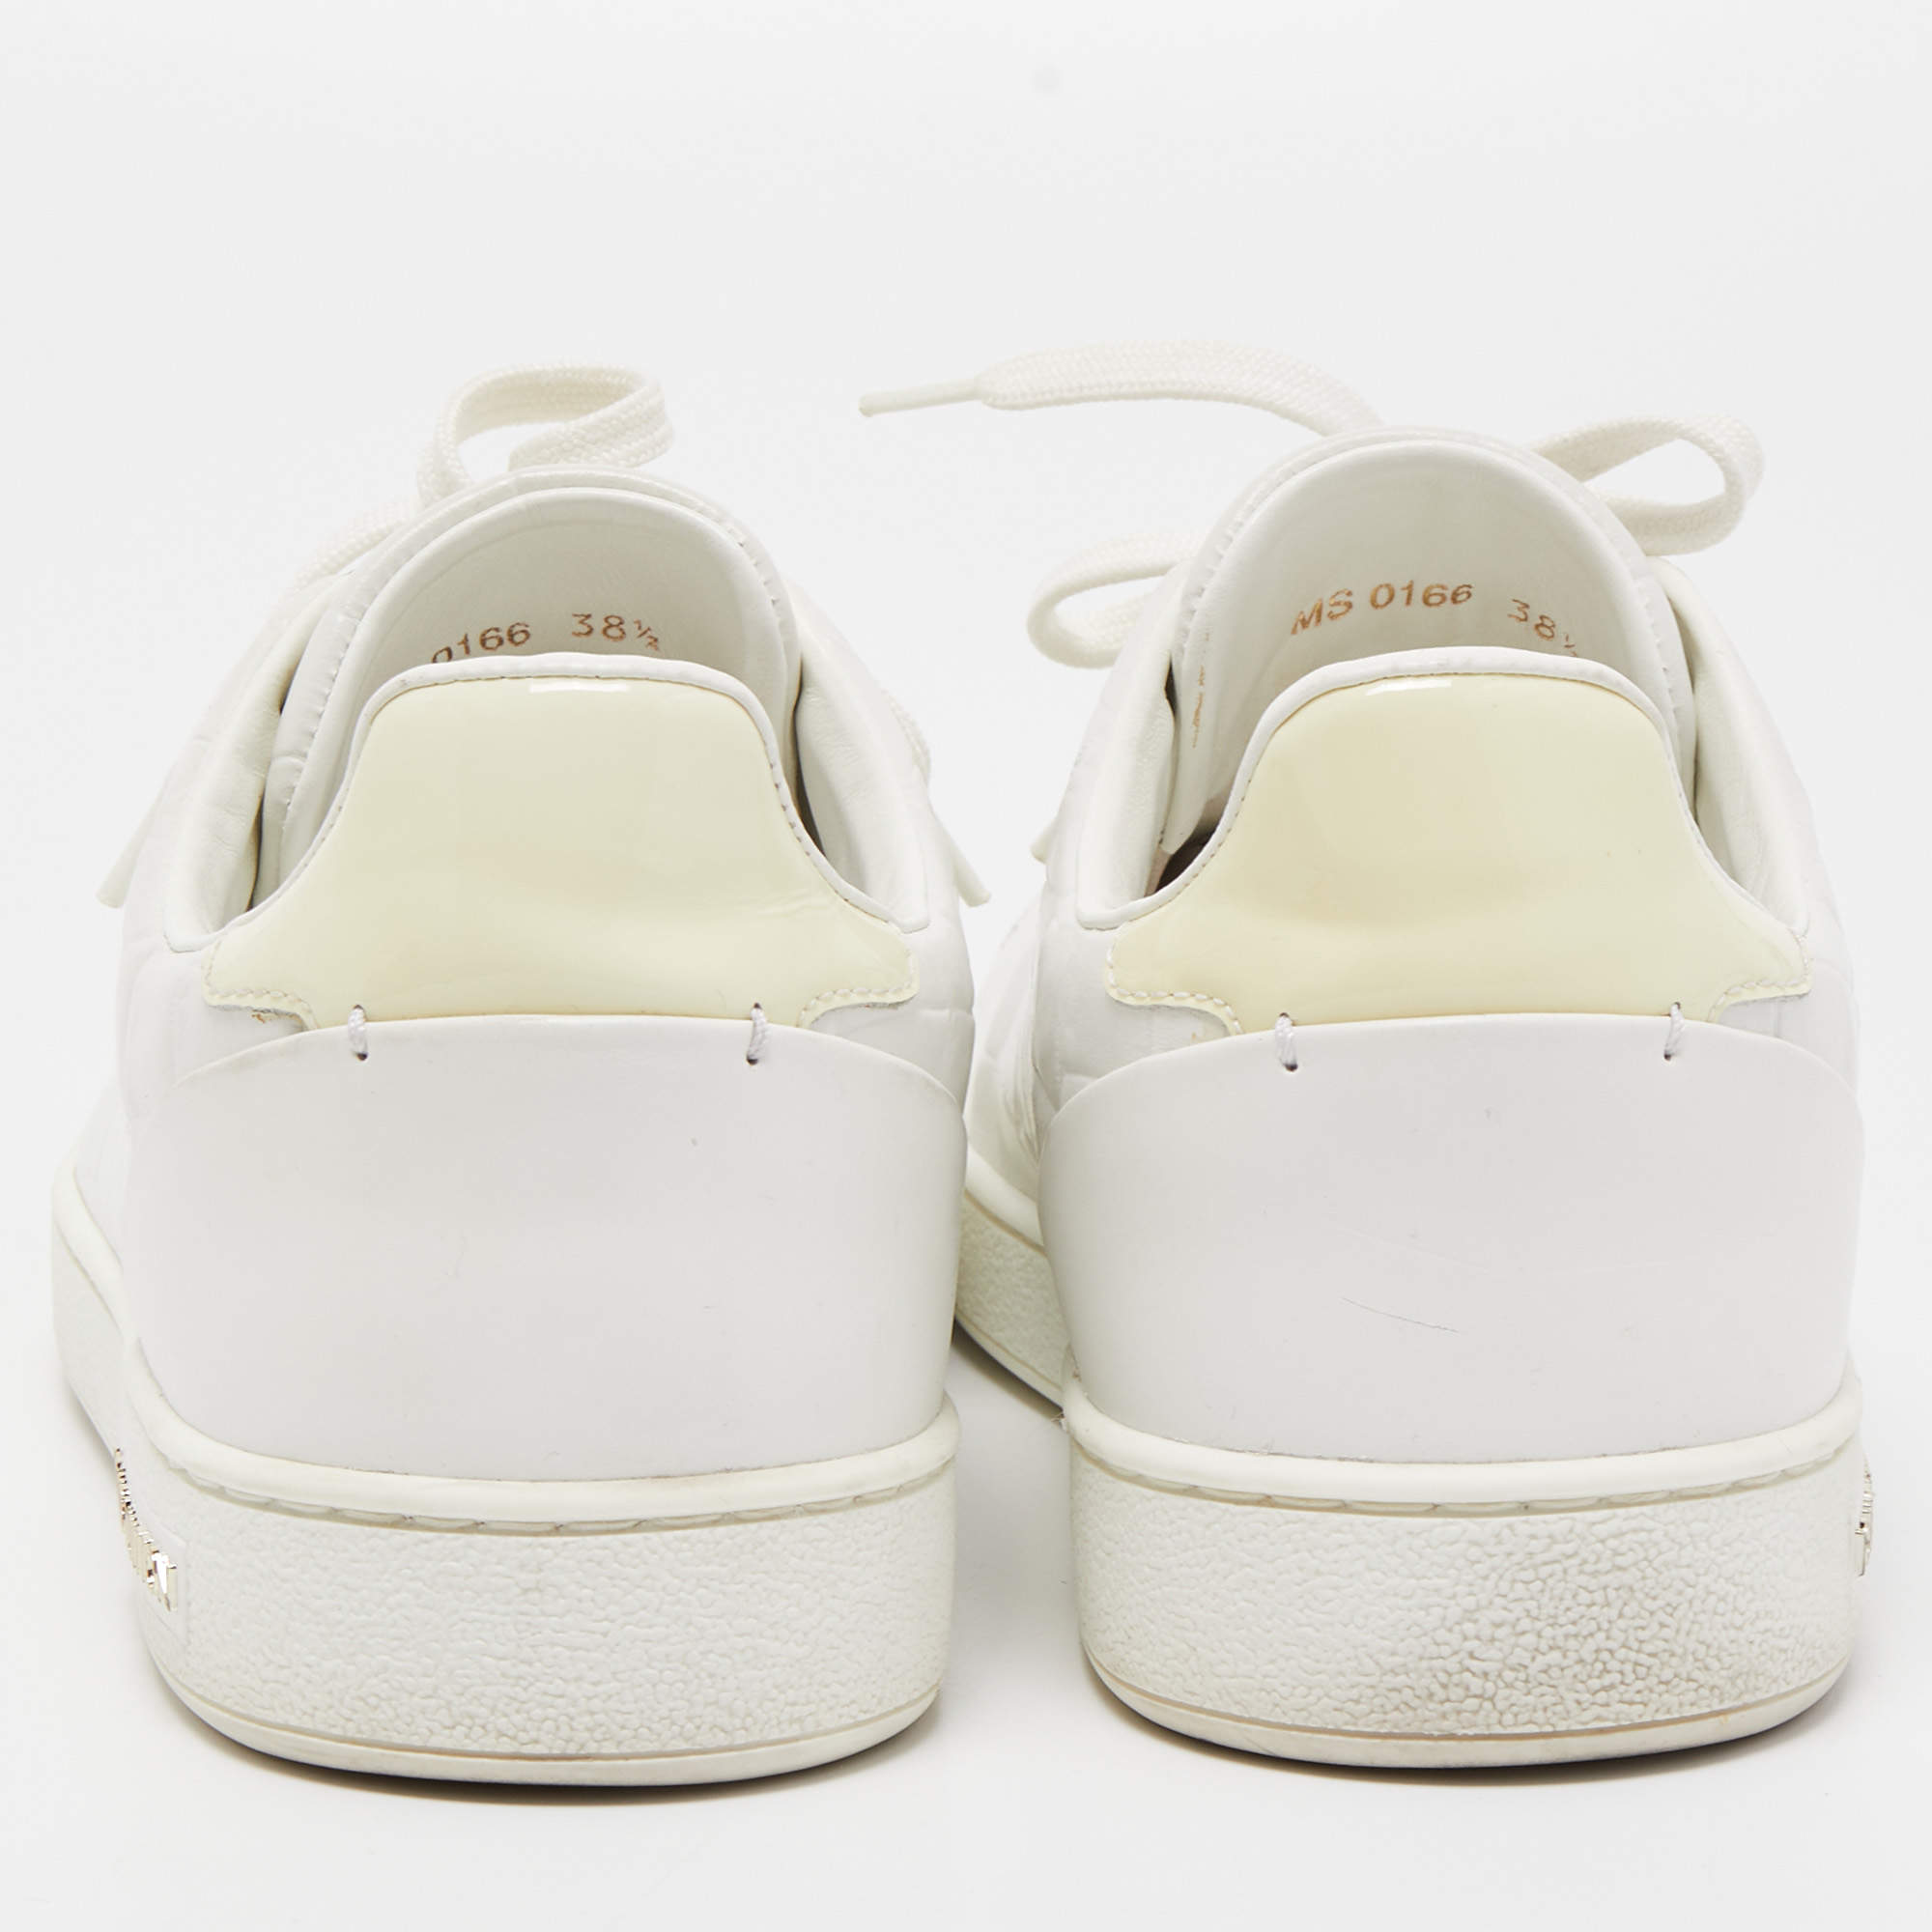 Louis Vuitton White Croc Embossed Leather Frontrow Low Top Sneakers Size  37.5